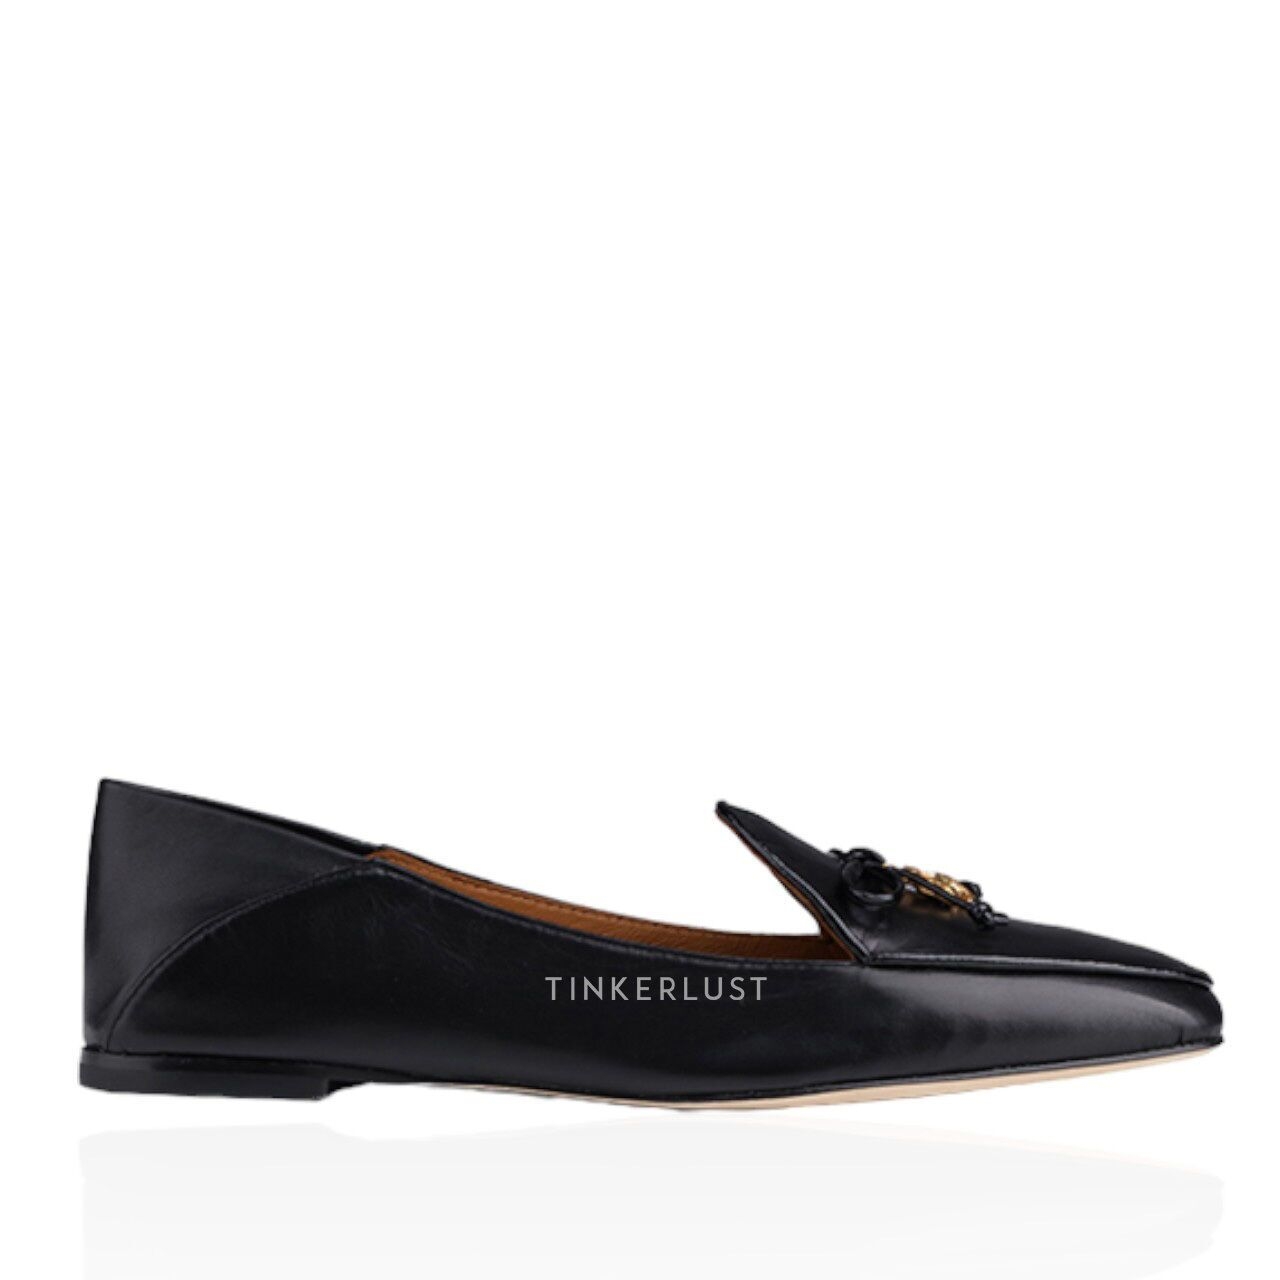 Tory Burch Charm Loafers in Perfect Black Calf Flats